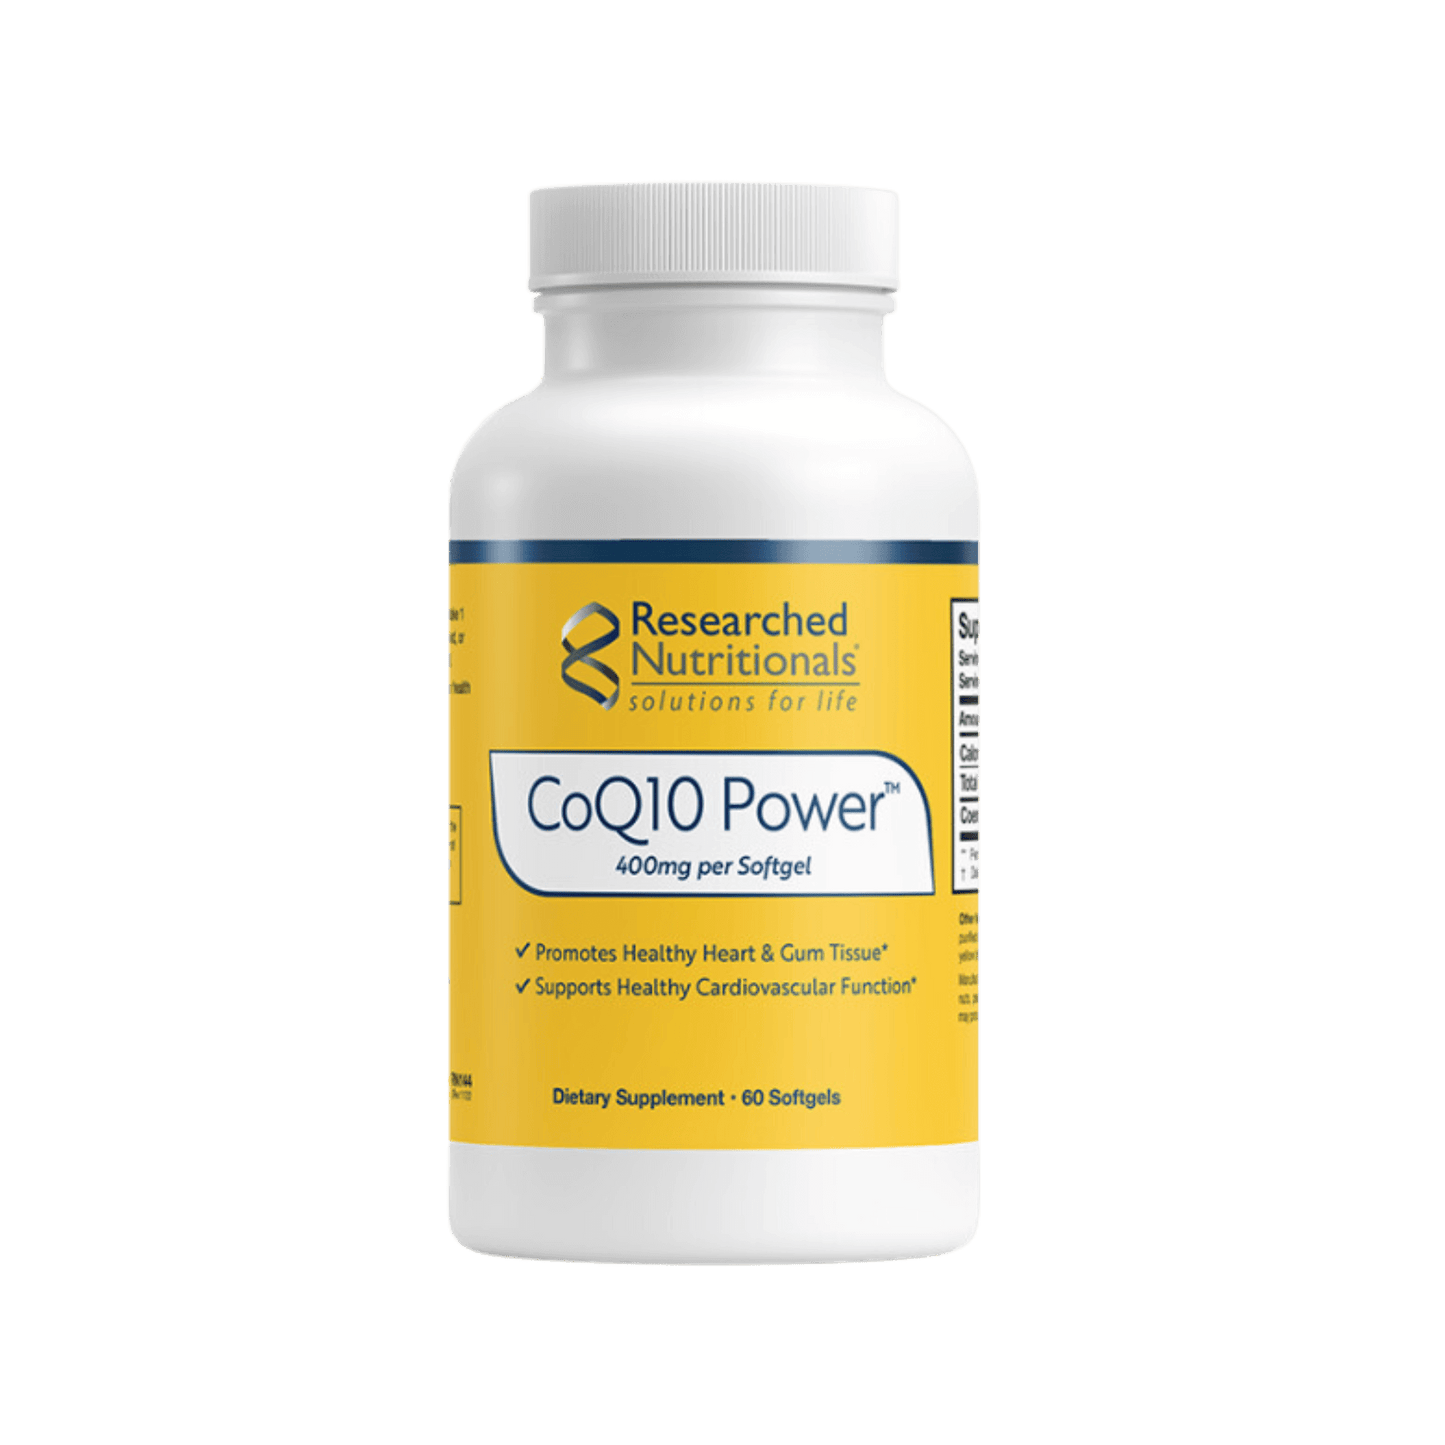 Researched Nutritionals CoQ10 Power Softgels